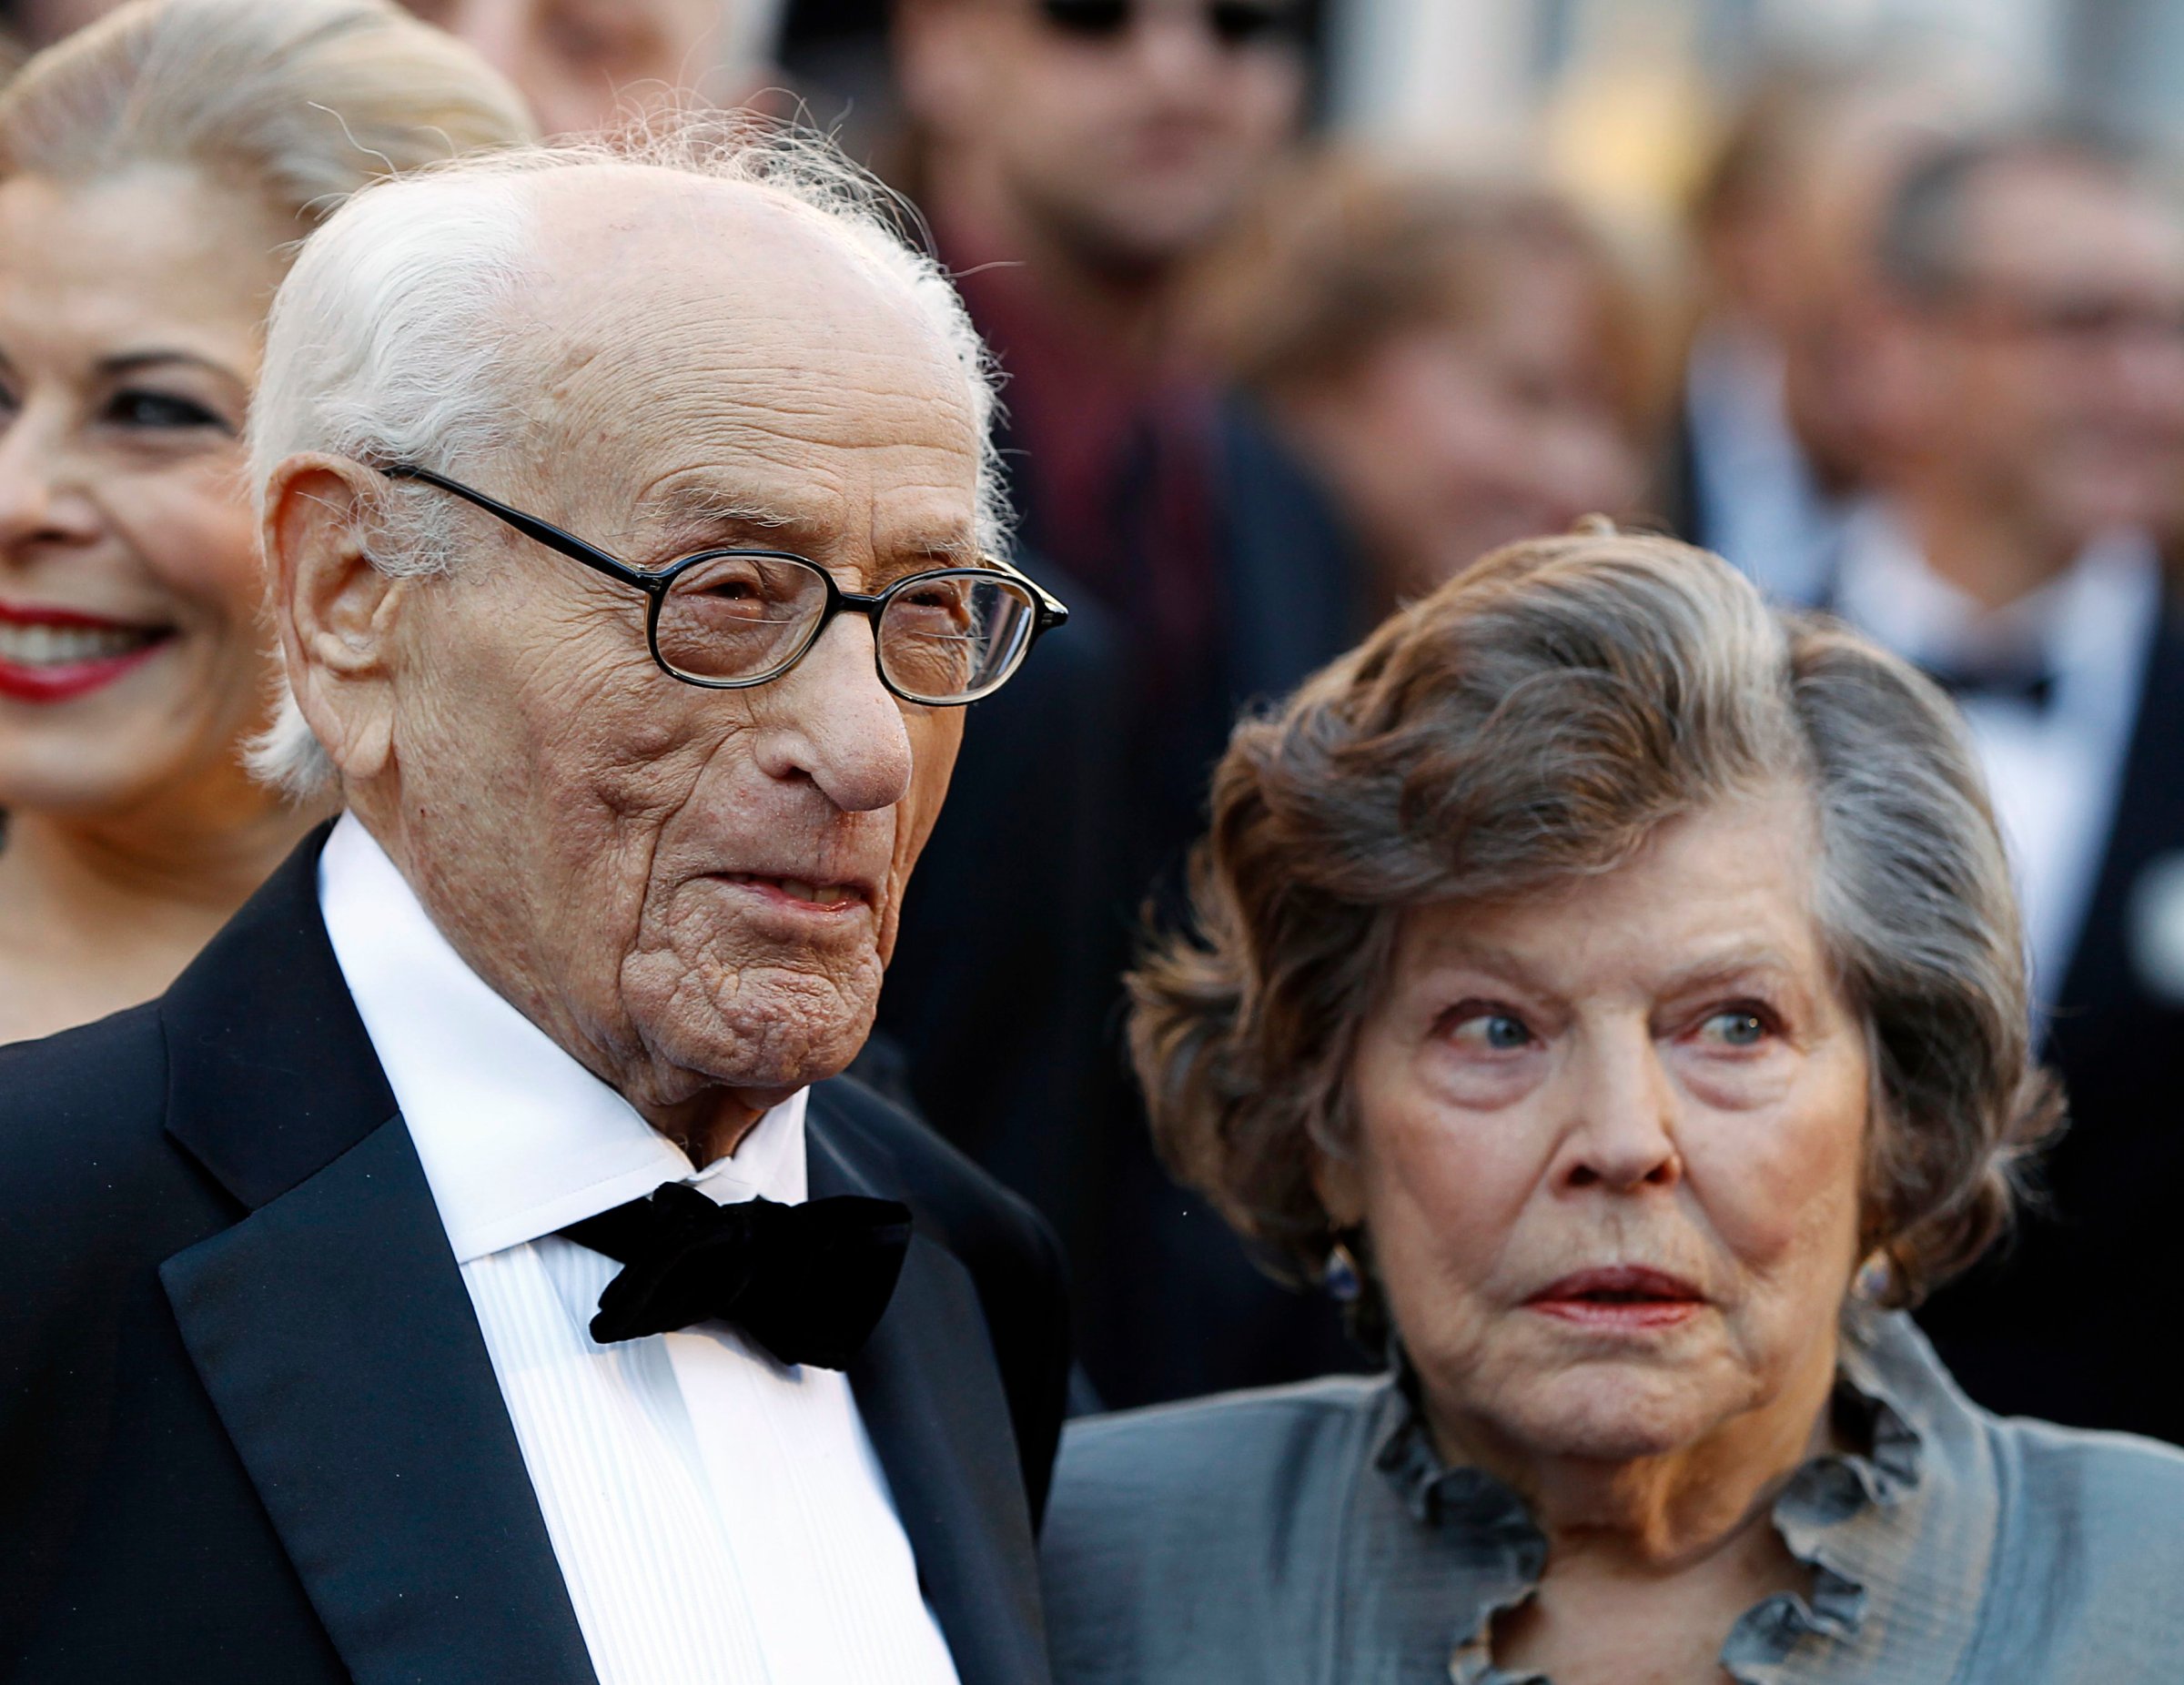 Honorary Oscar recipient actor Eli Wallach and wife Anne Jackson arrive at the 83rd Academy Awards in Hollywood